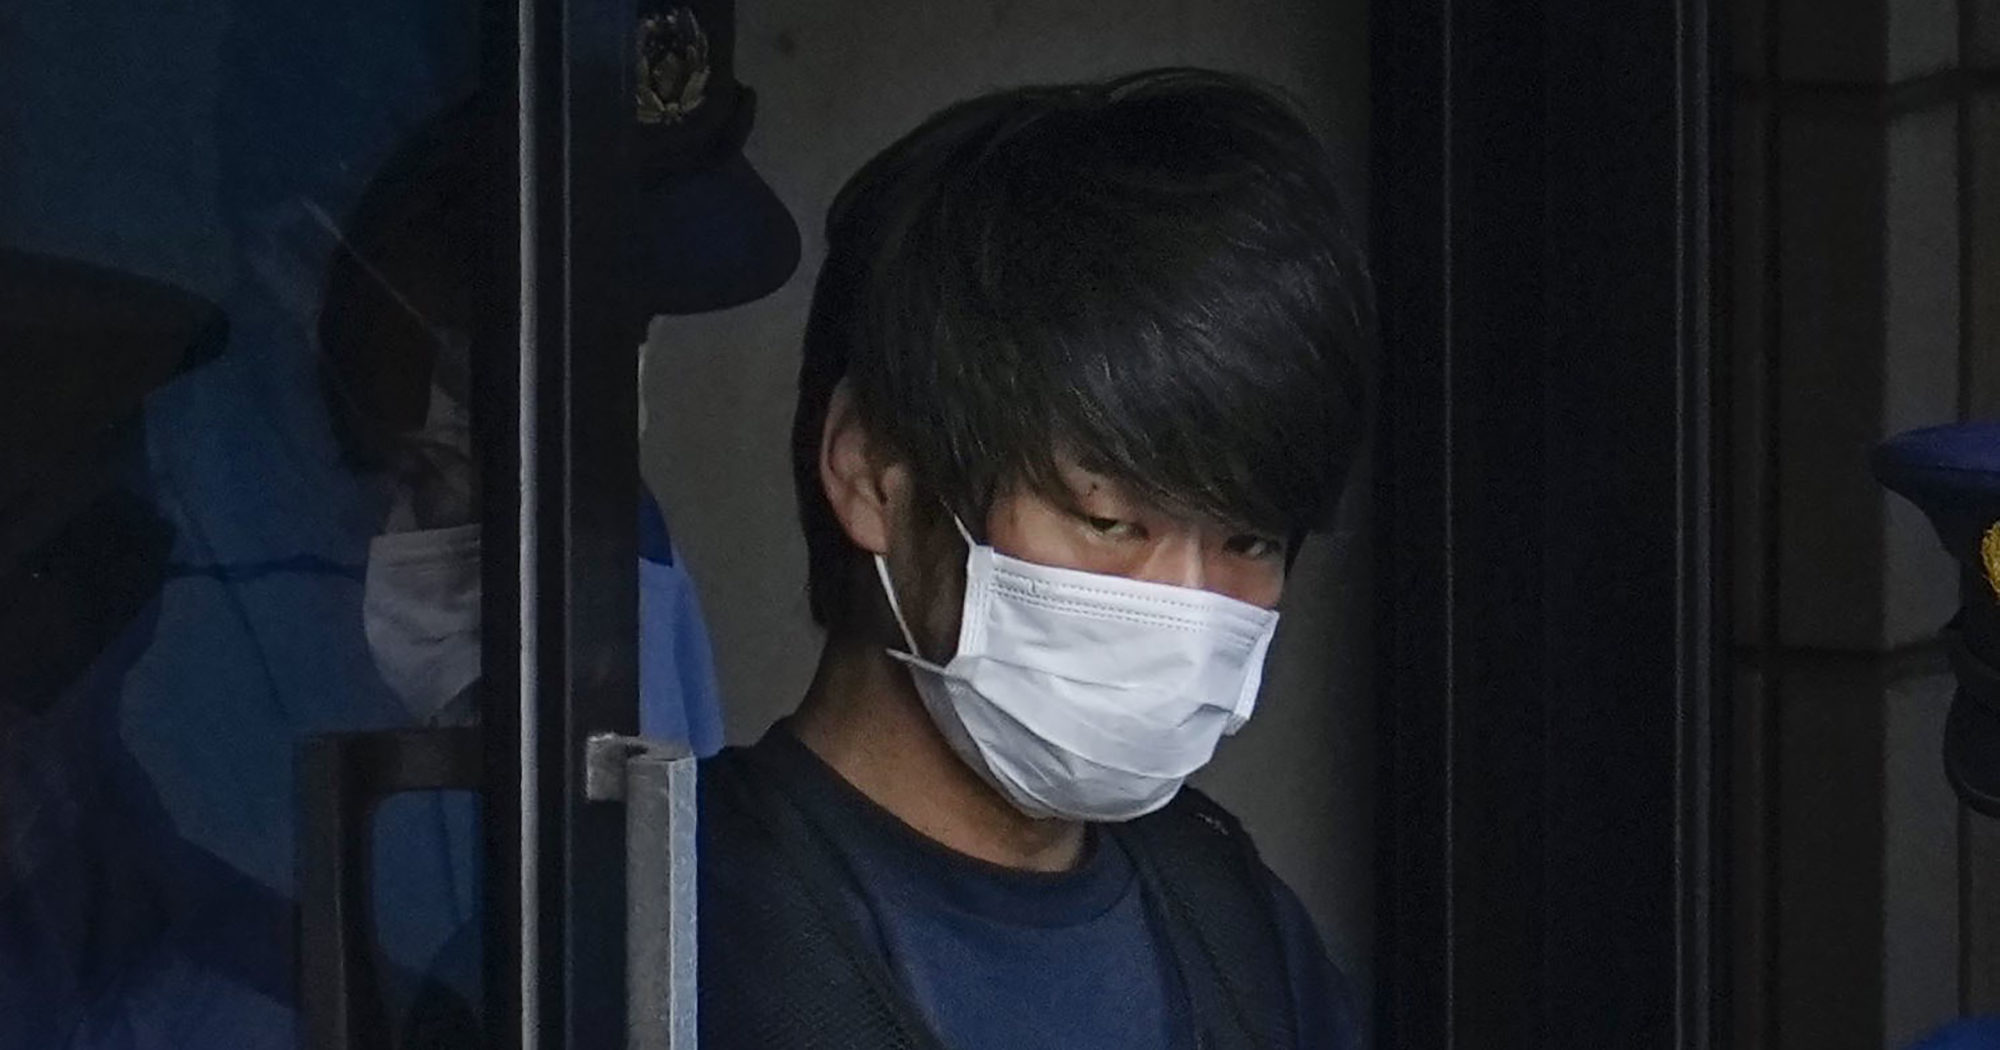 Tetsuya Yamagami, the alleged assassin of former Japanese Prime Minister Shinzo Abe, leaves a police station in Nara, western Japan, on July 10.